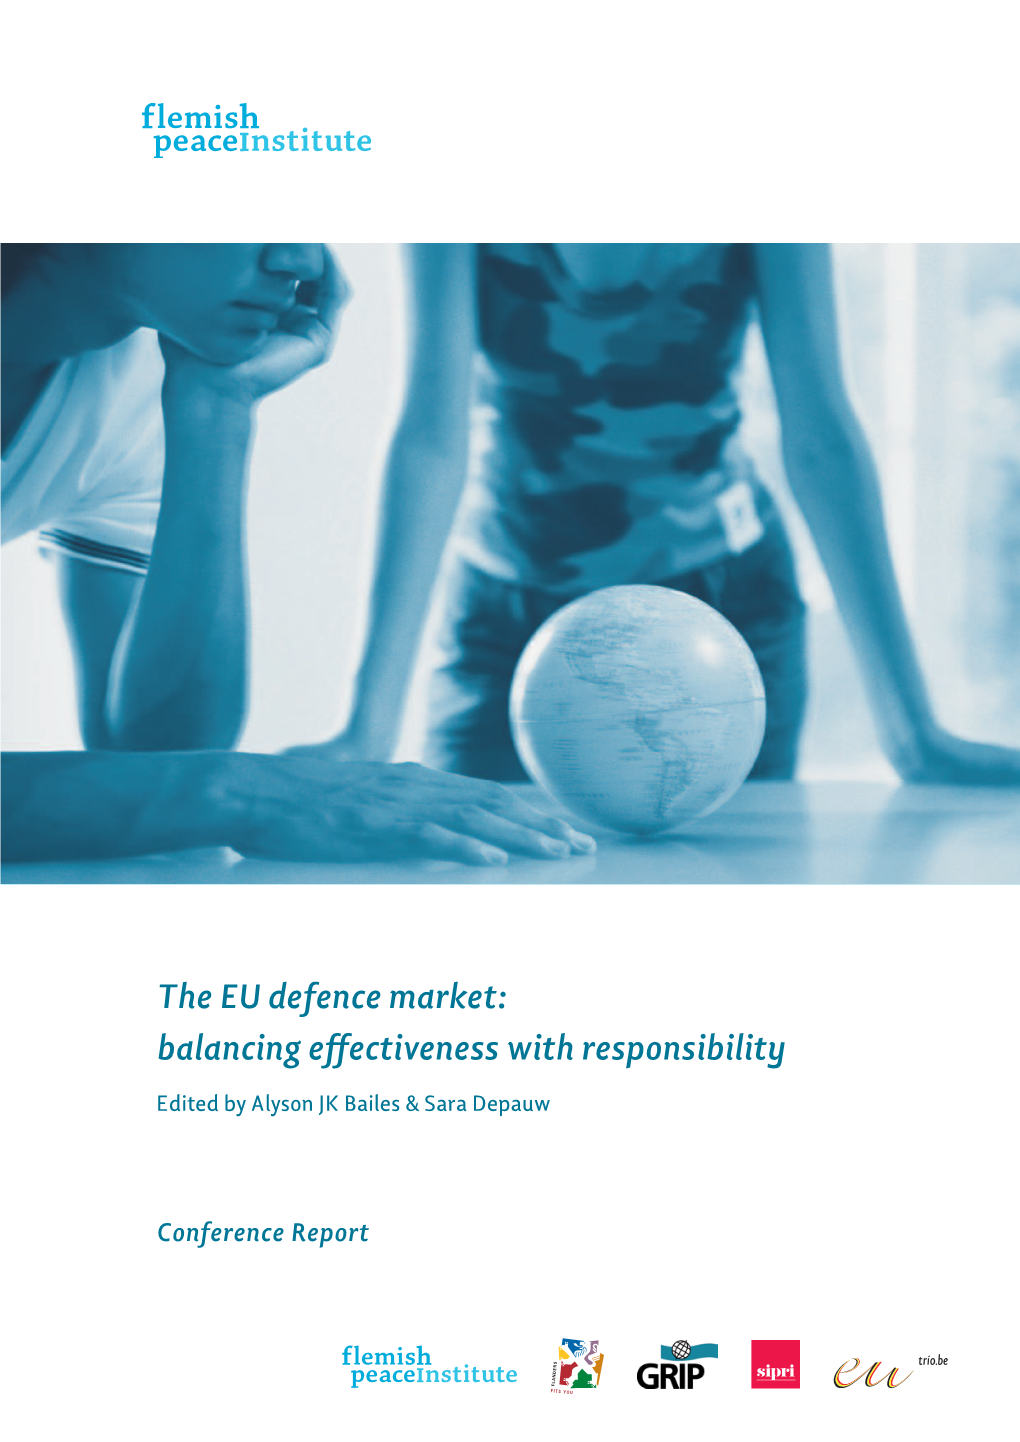 The EU Defence Market: Balancing Effectiveness with Responsibility